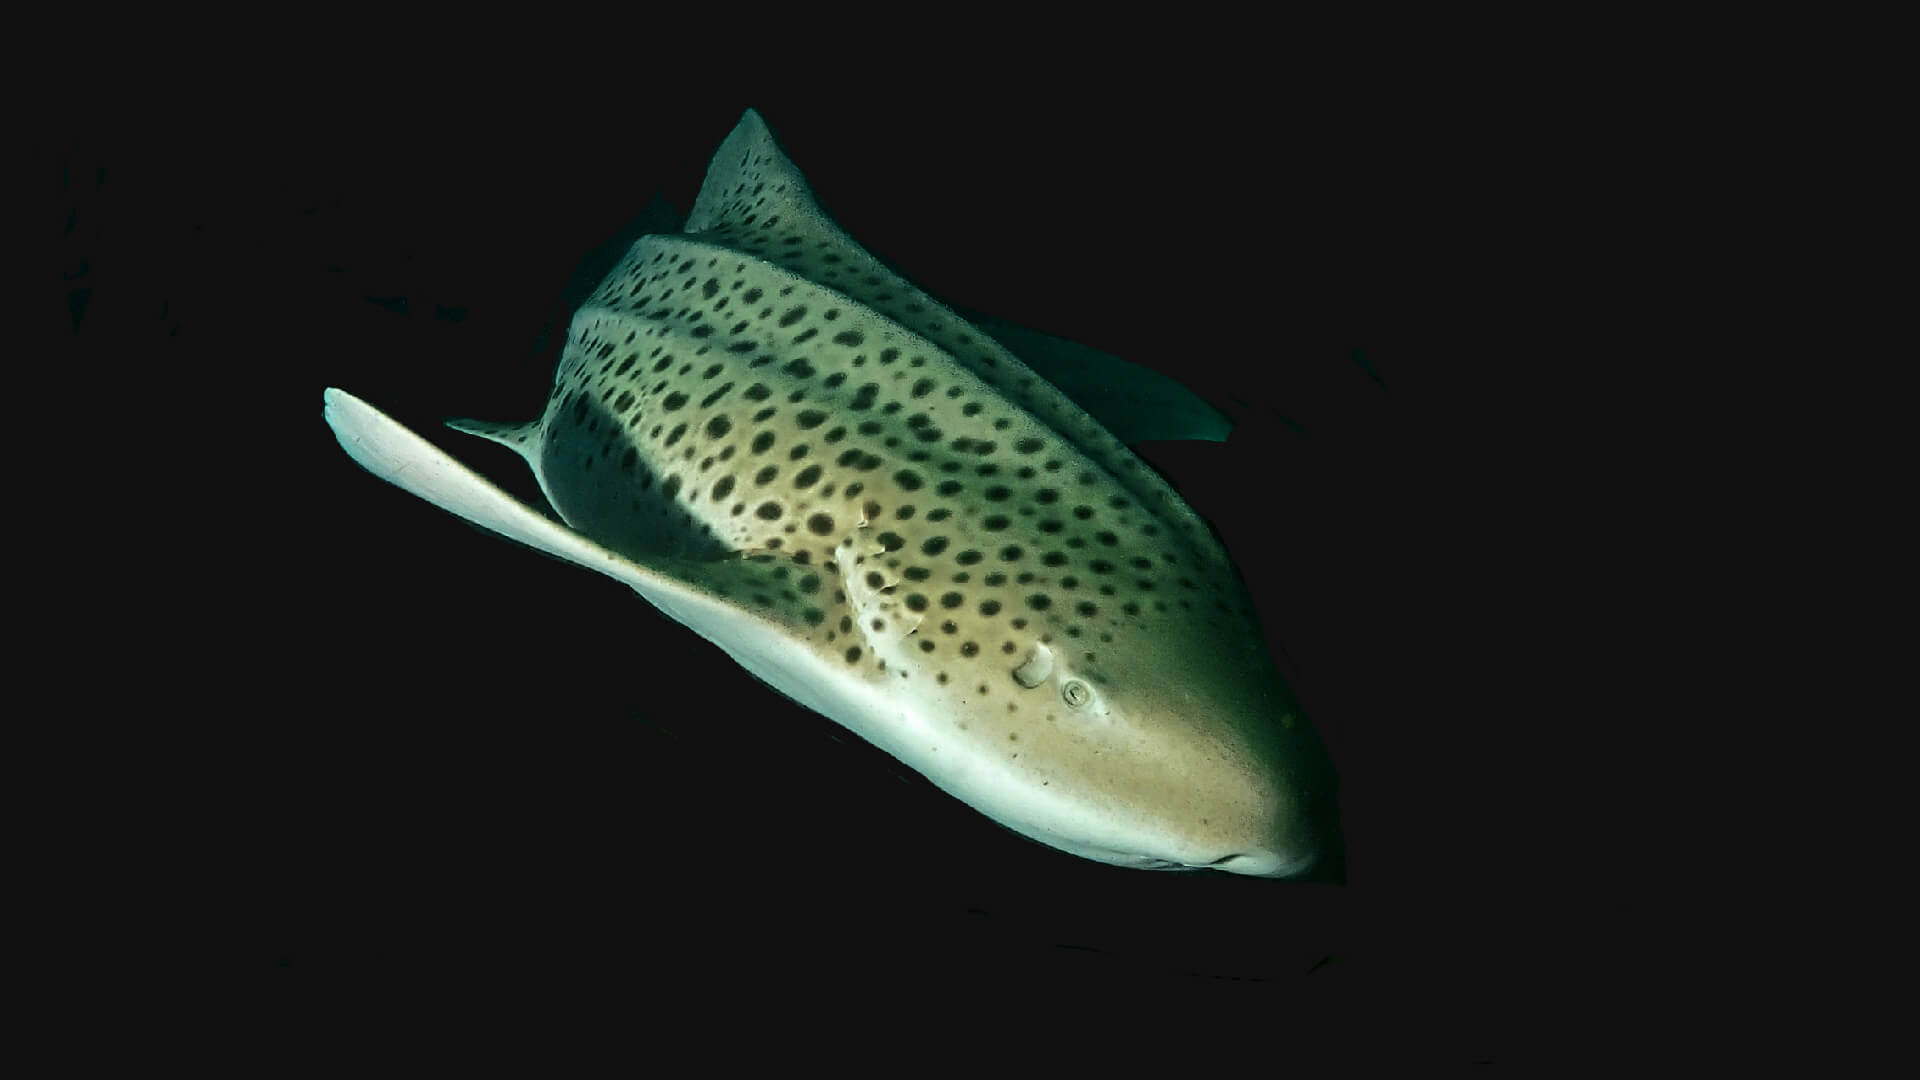 frequent leopard shark sightings in phuket